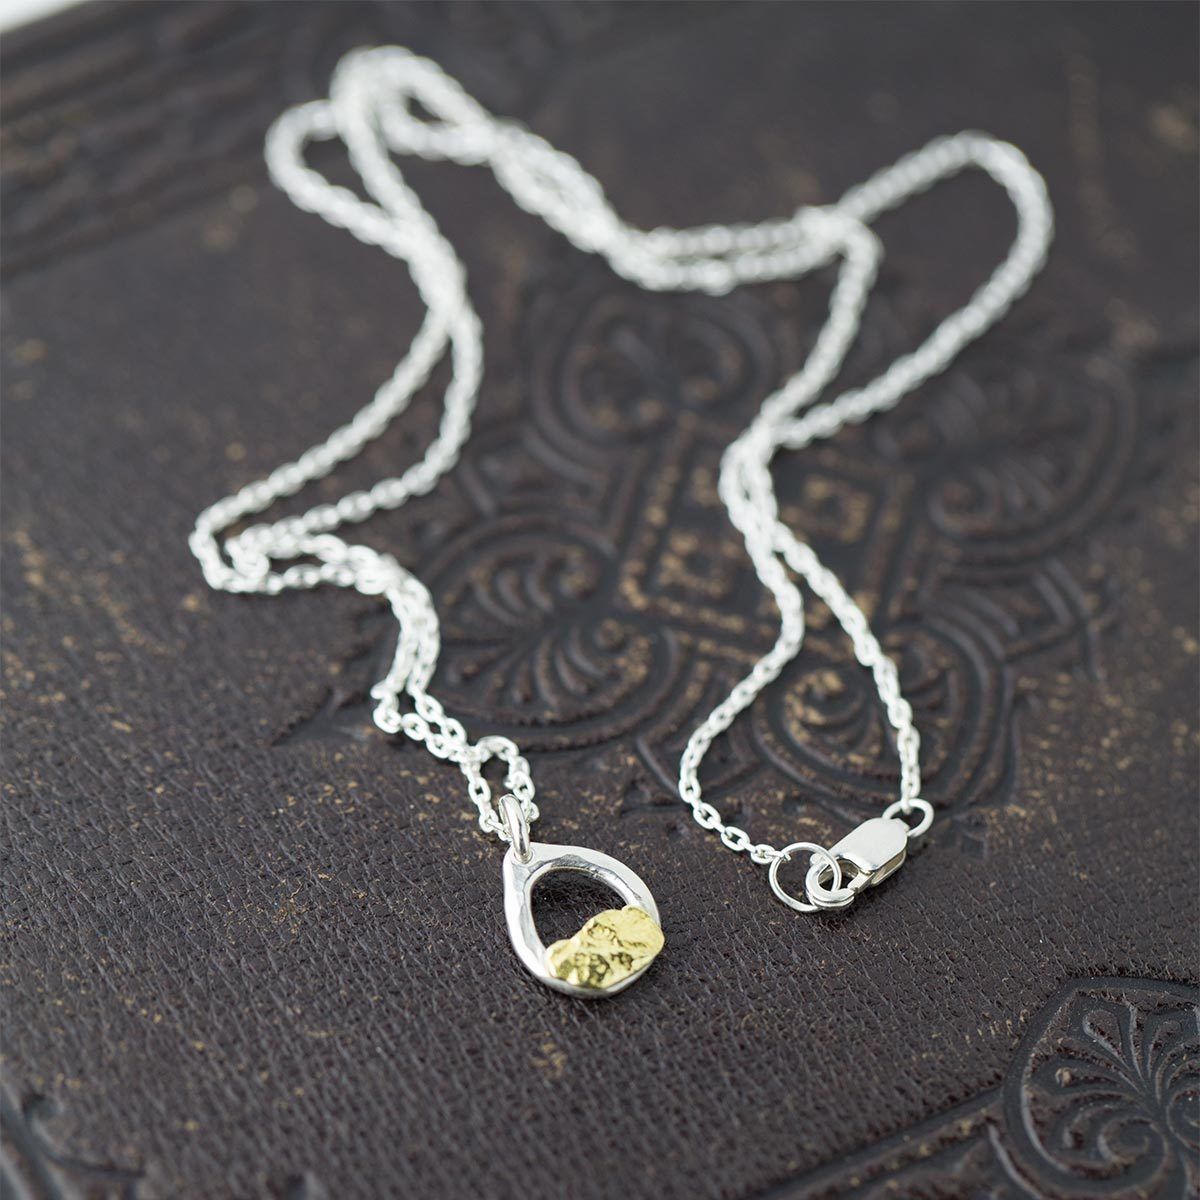 Alaska Gold Nugget &amp; Sterling Silver Necklace - Handmade Jewelry by Burnish